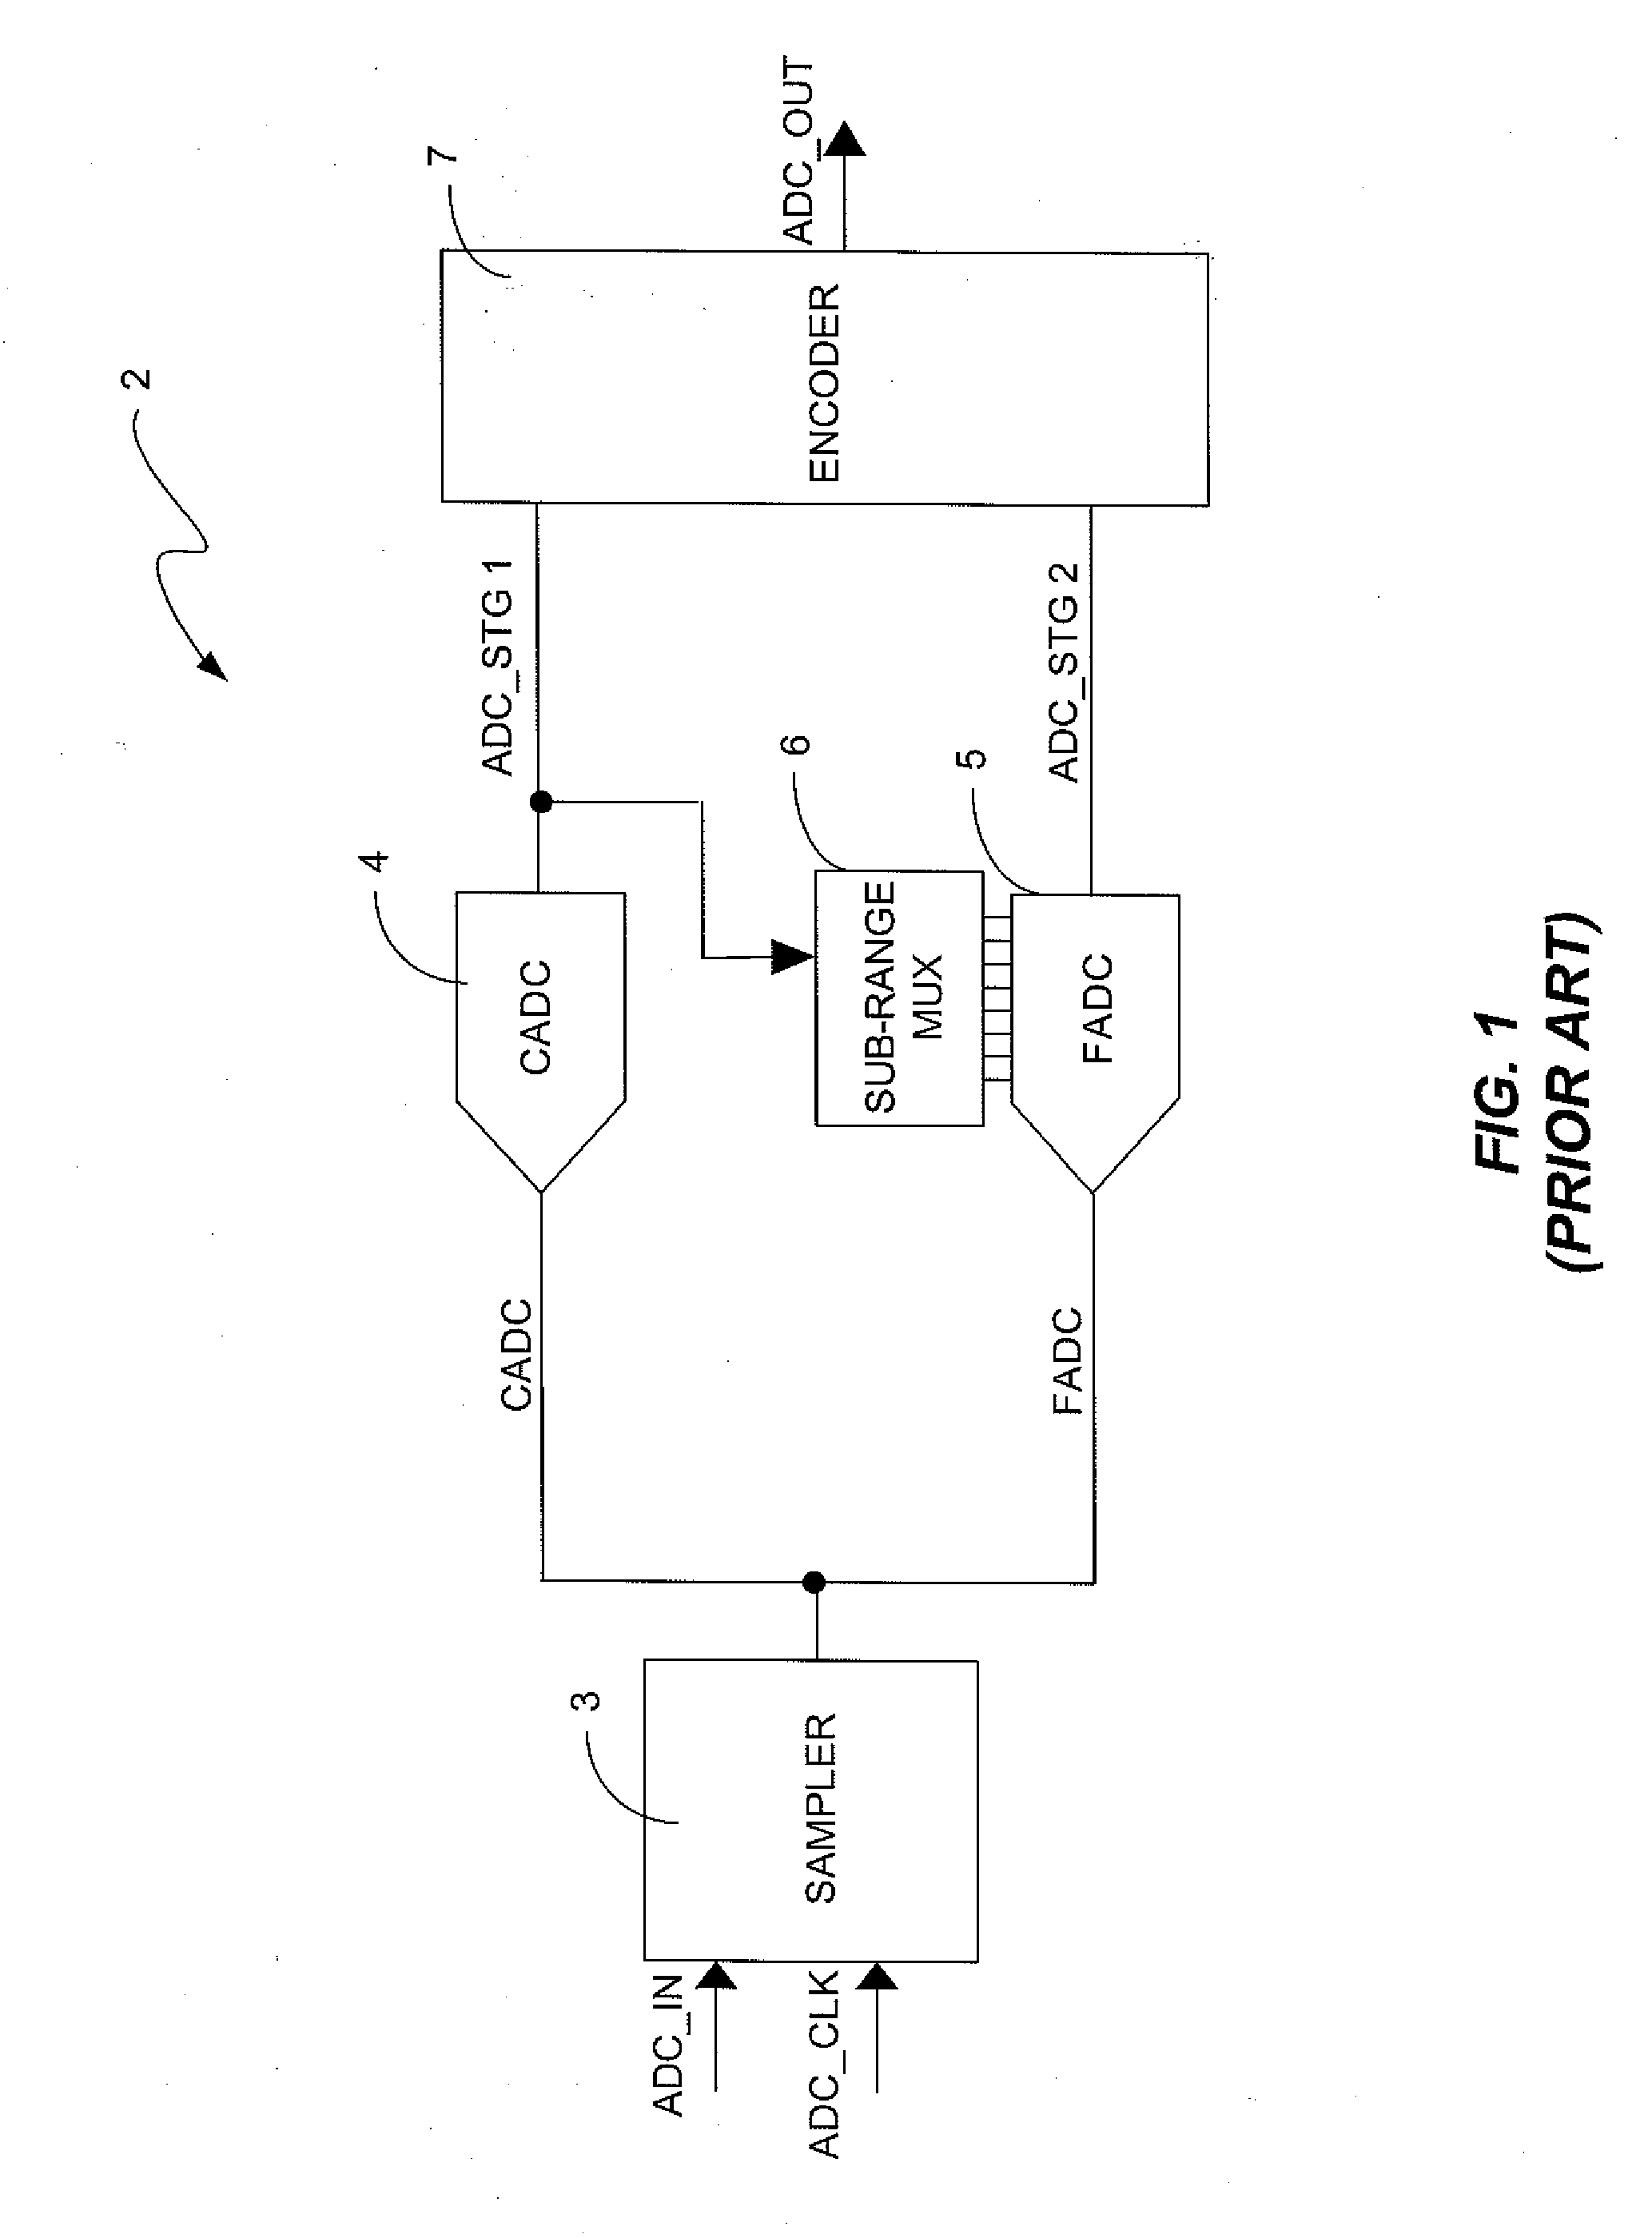 Two-step sub-ranging analog-to-digital converter and method for performing two-step sub-ranging in an analog-to-digital converter